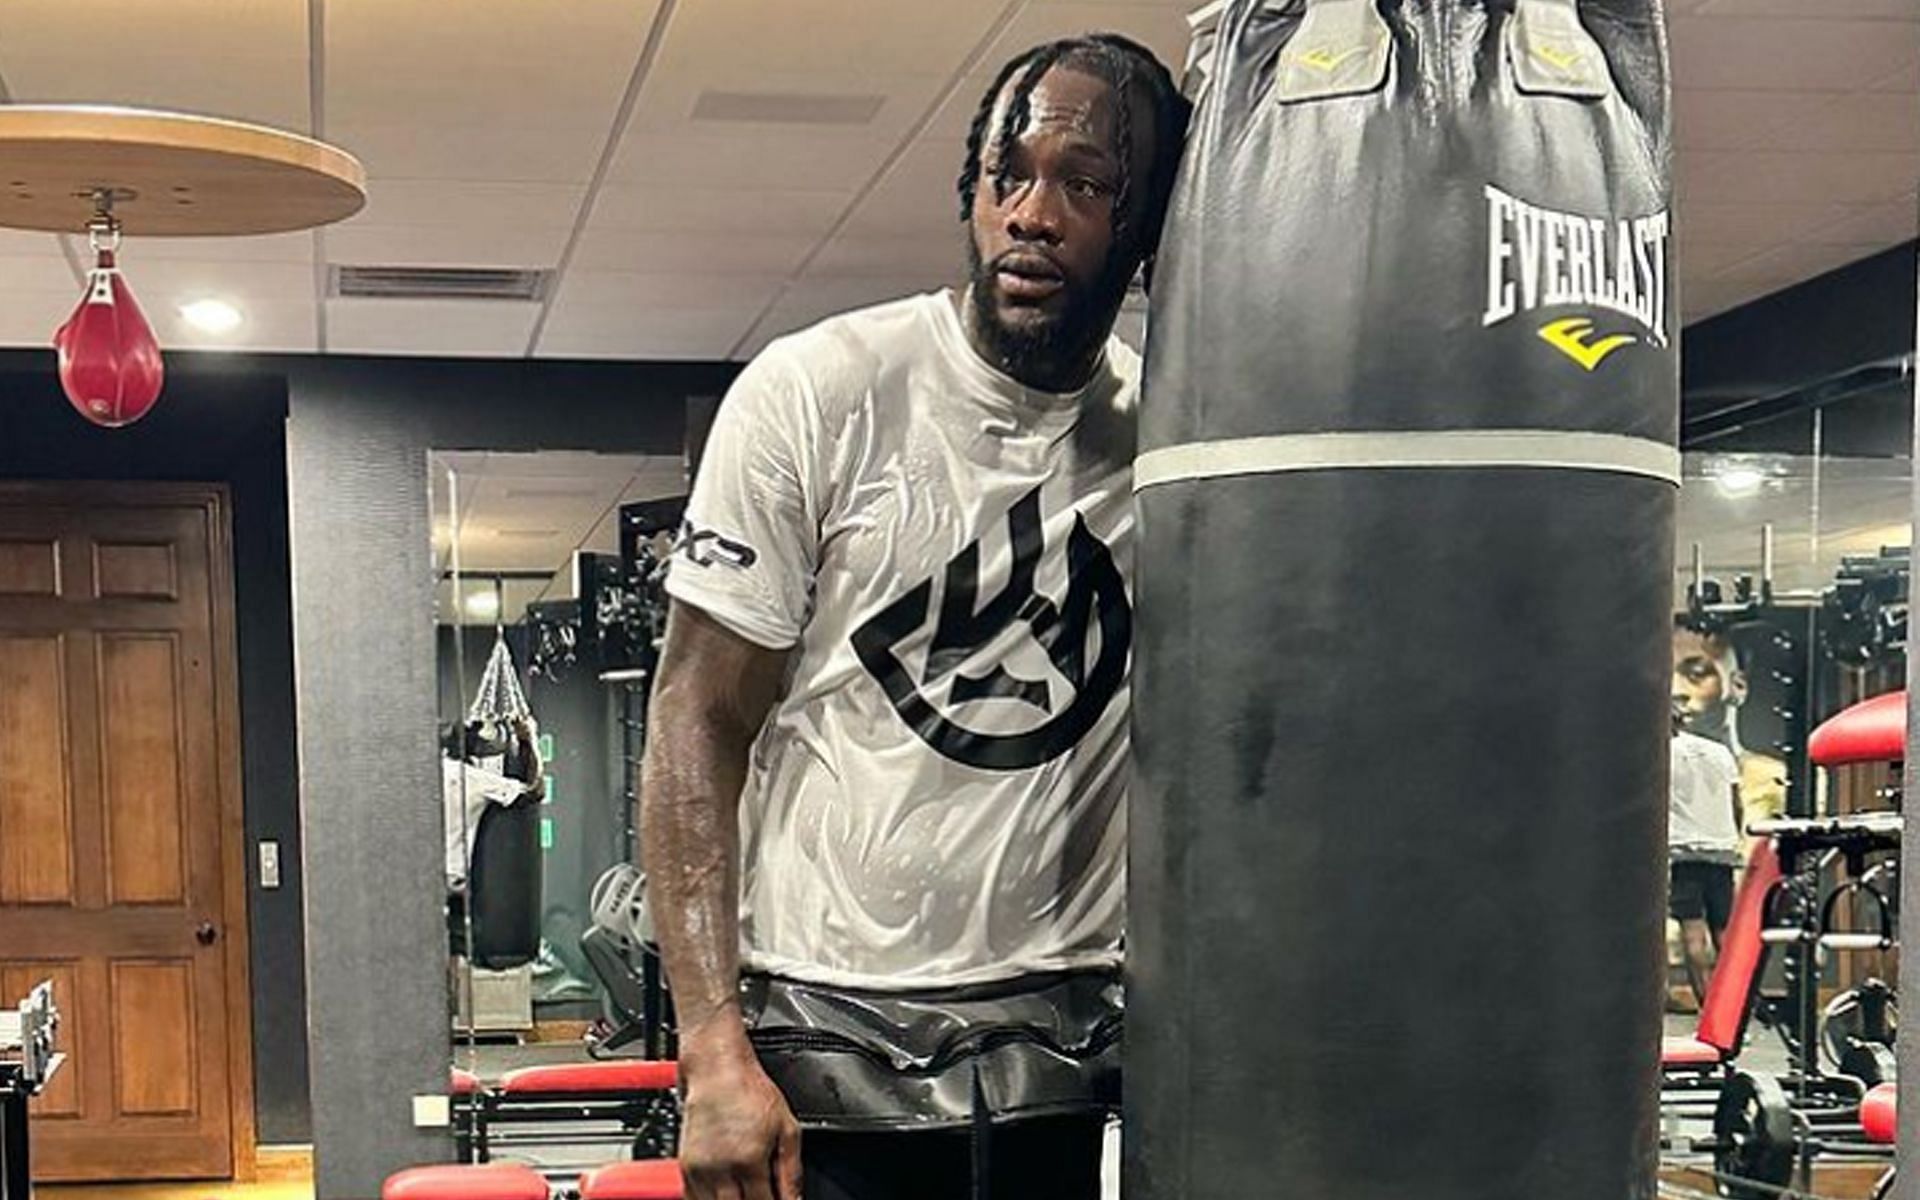 Deontay Wilder, Joseph Parker and a shocking 'Day of Reckoning' in Riyadh, Boxing